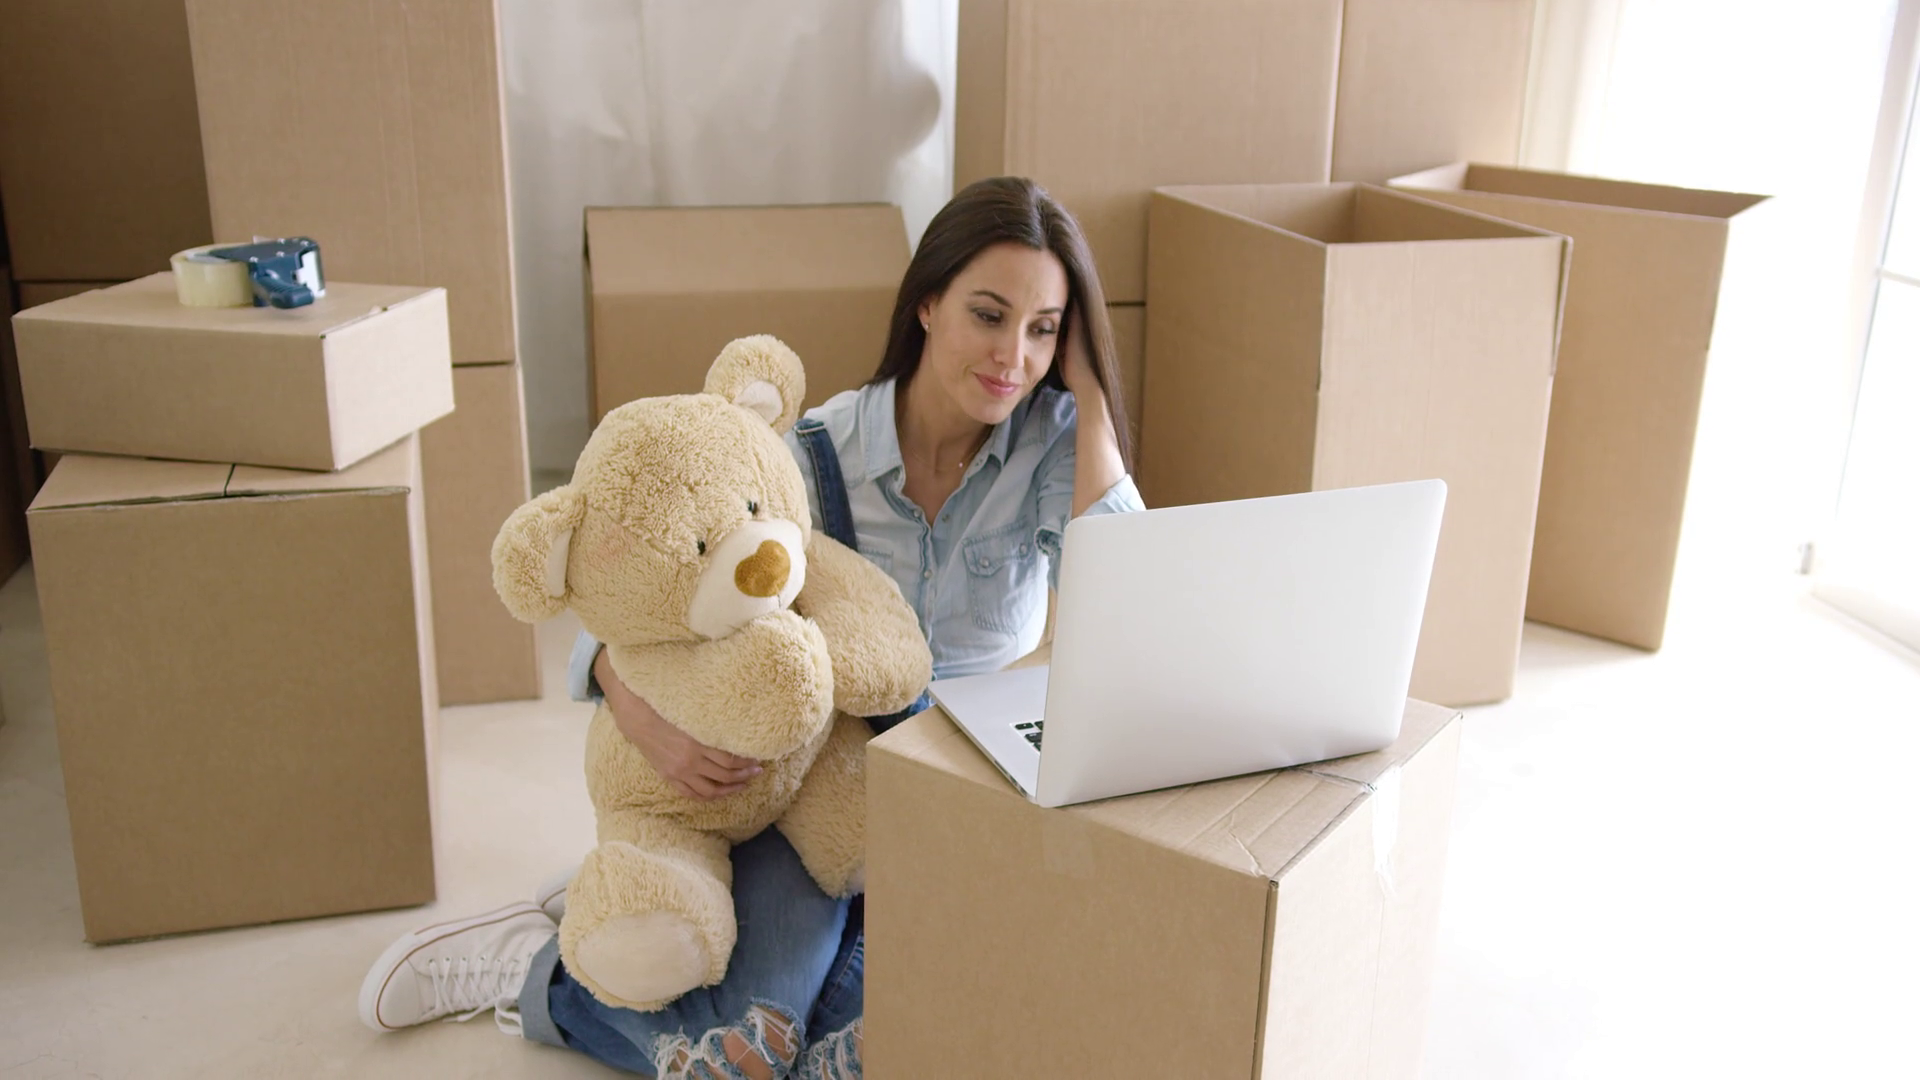 The hassle in moving and the help of moving services